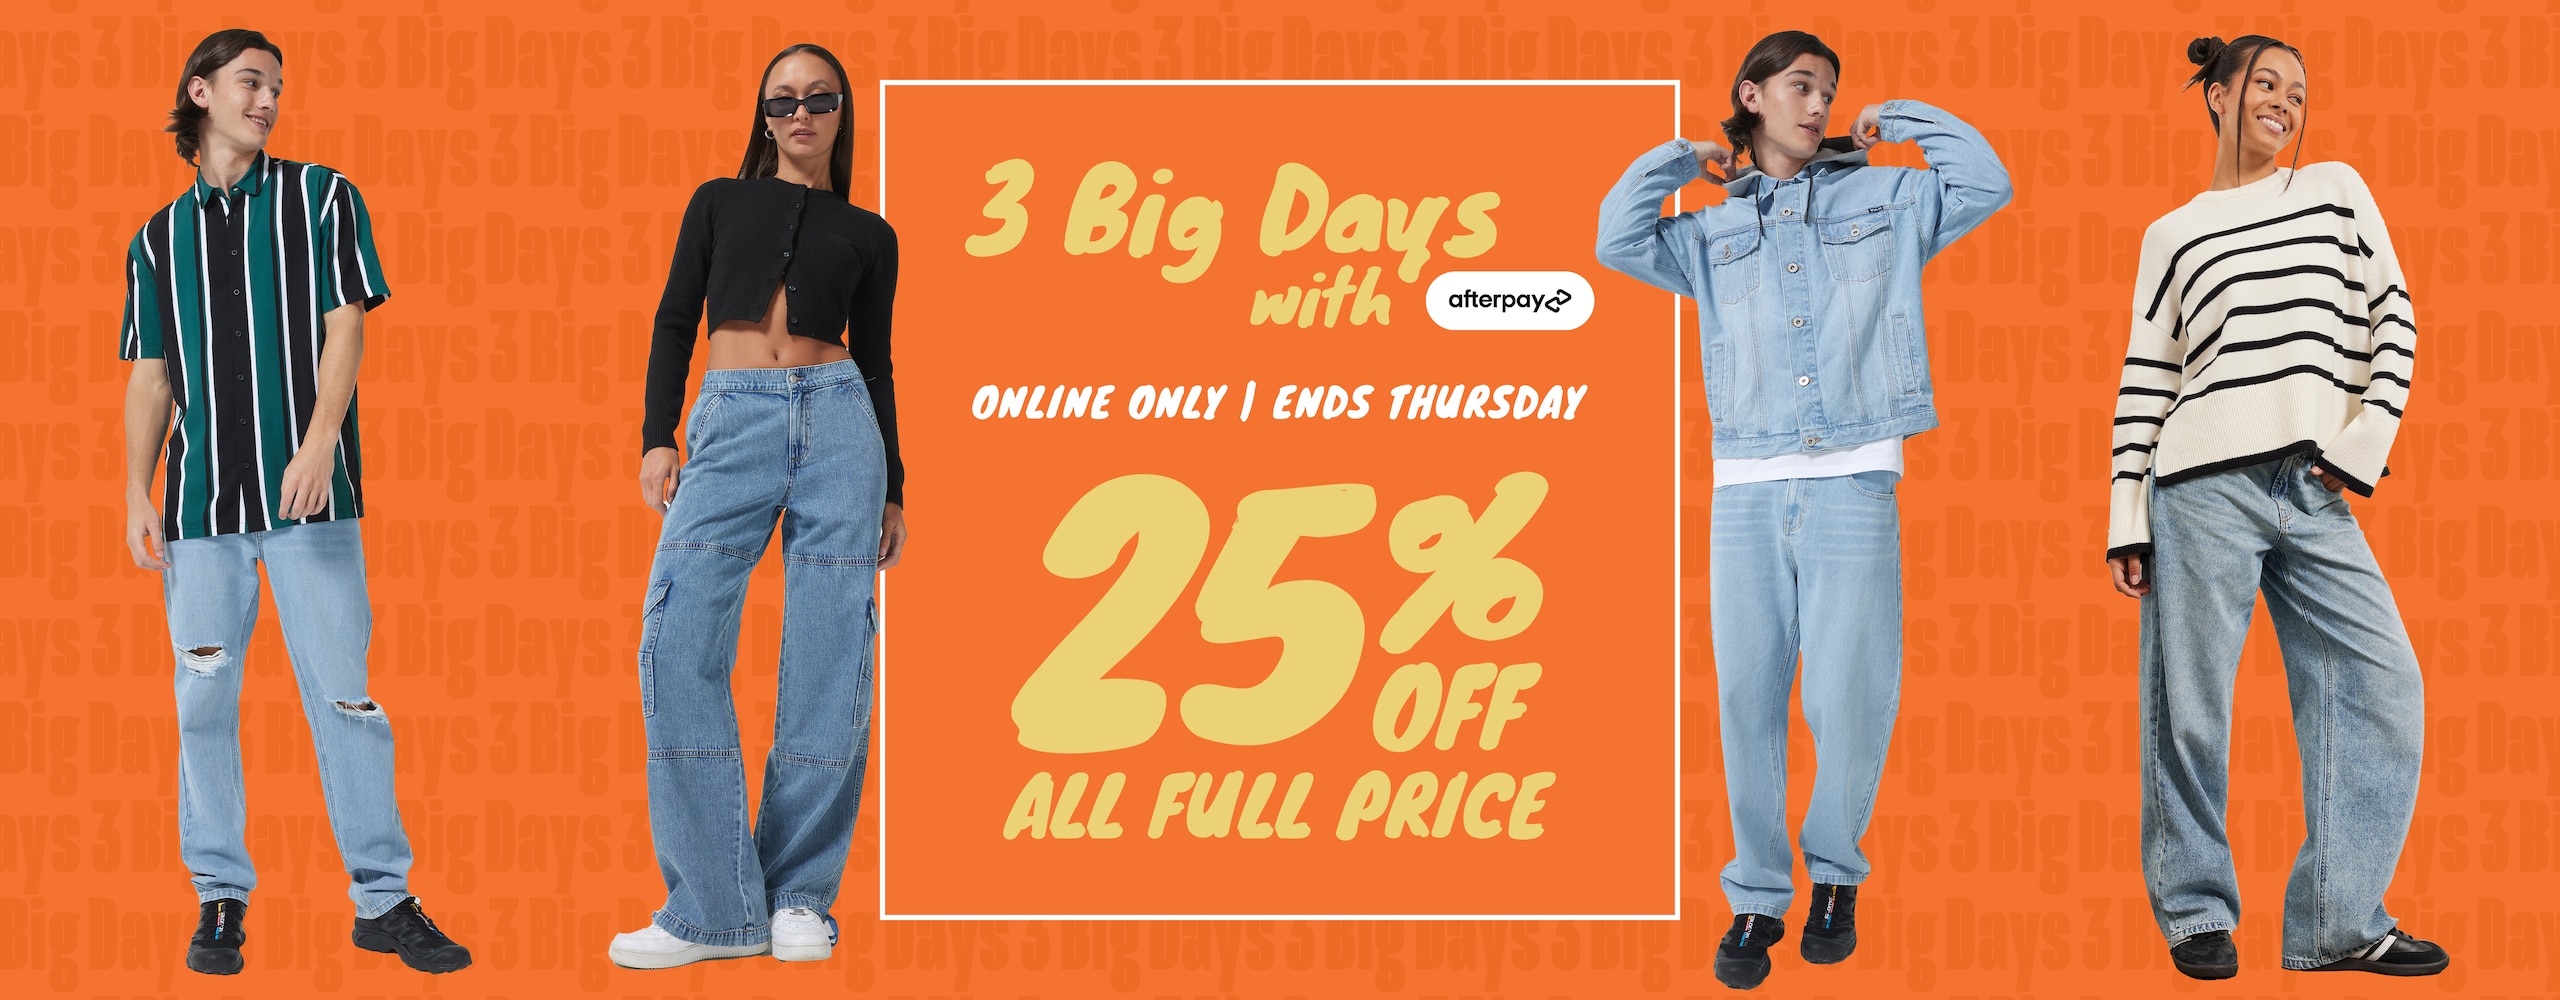 3 Big Days With Afterpay. Online Only. Ends Thursday. 25% Off All Full Price